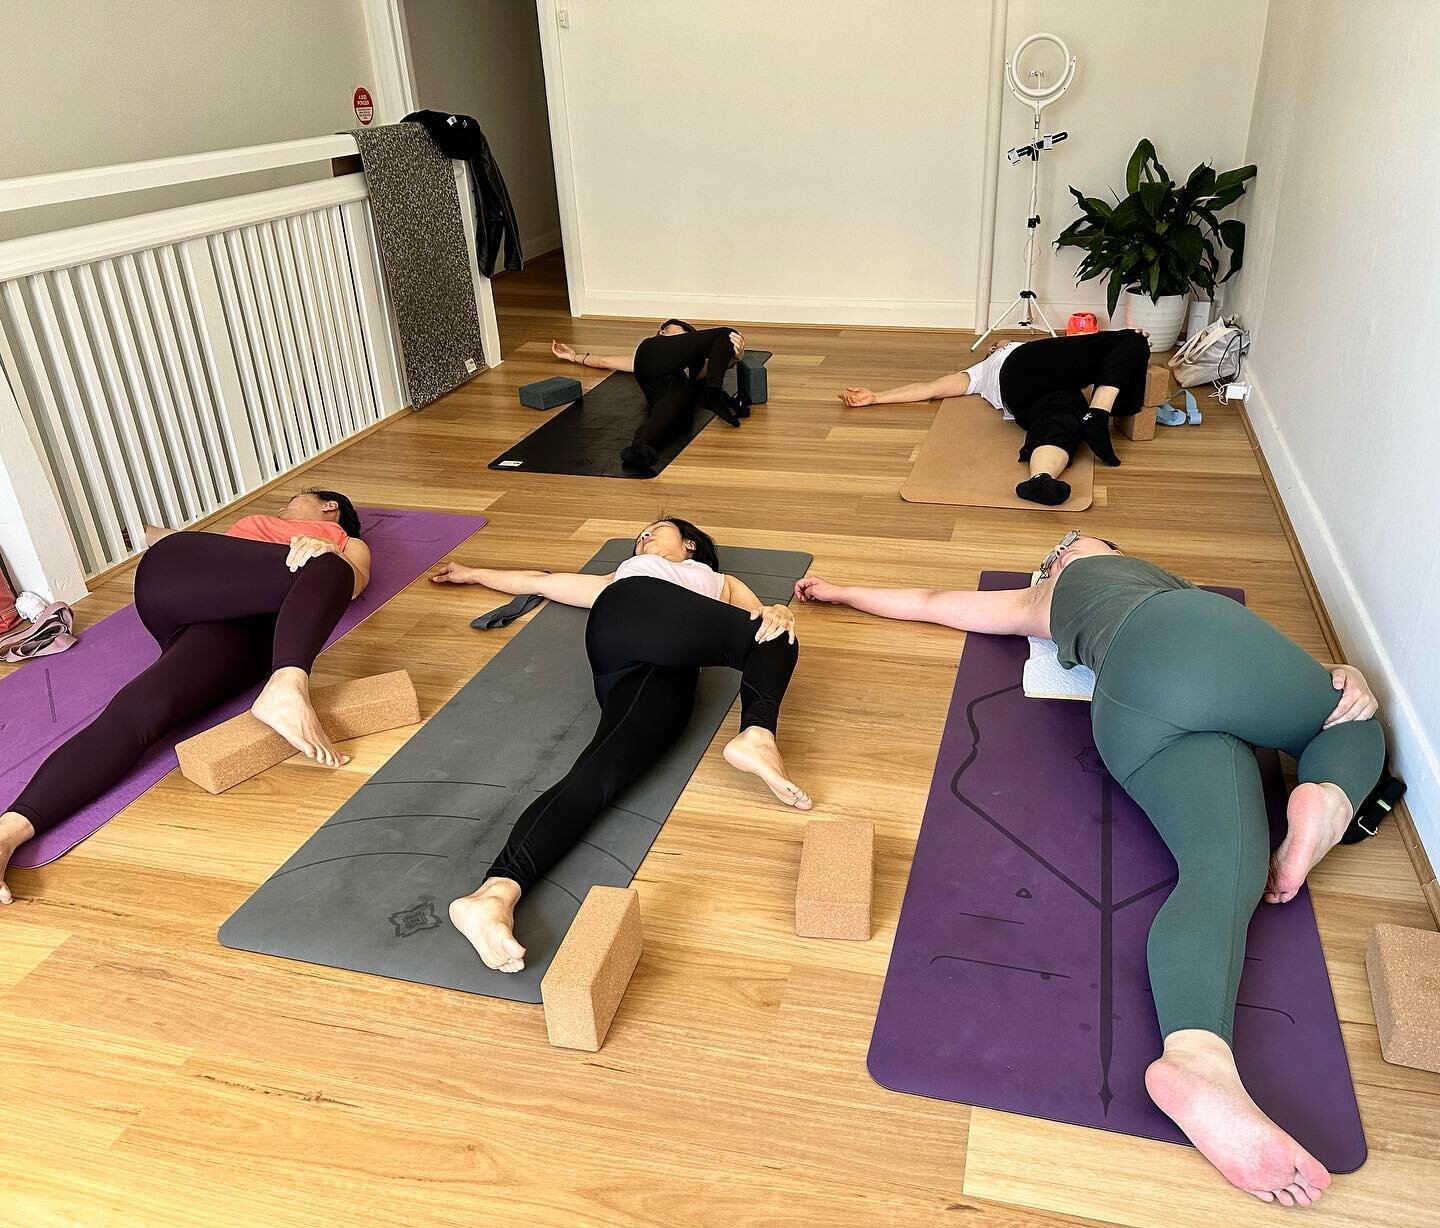 Thurs 11am yoga with Cathy this morning 💗 what a blissful morning 😉 

Twisting the spine while lying down with the support of the floor allows us to slowly relax and settle into a deep and nourishing spine rotation. This pose stimulates digestion, 